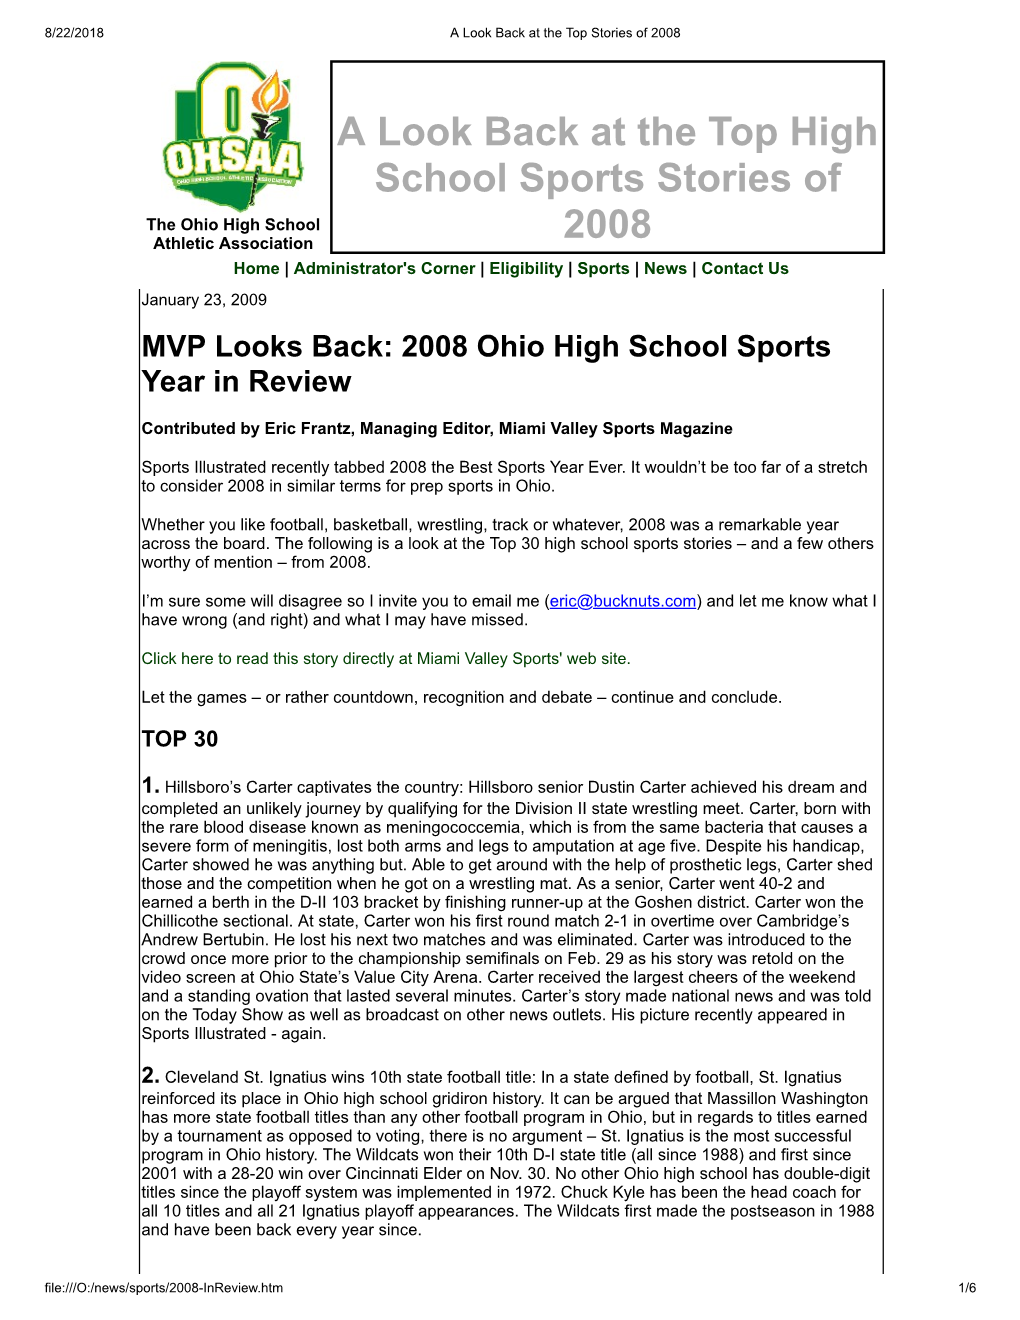 A Look Back at the Top High School Sports Stories of 2008